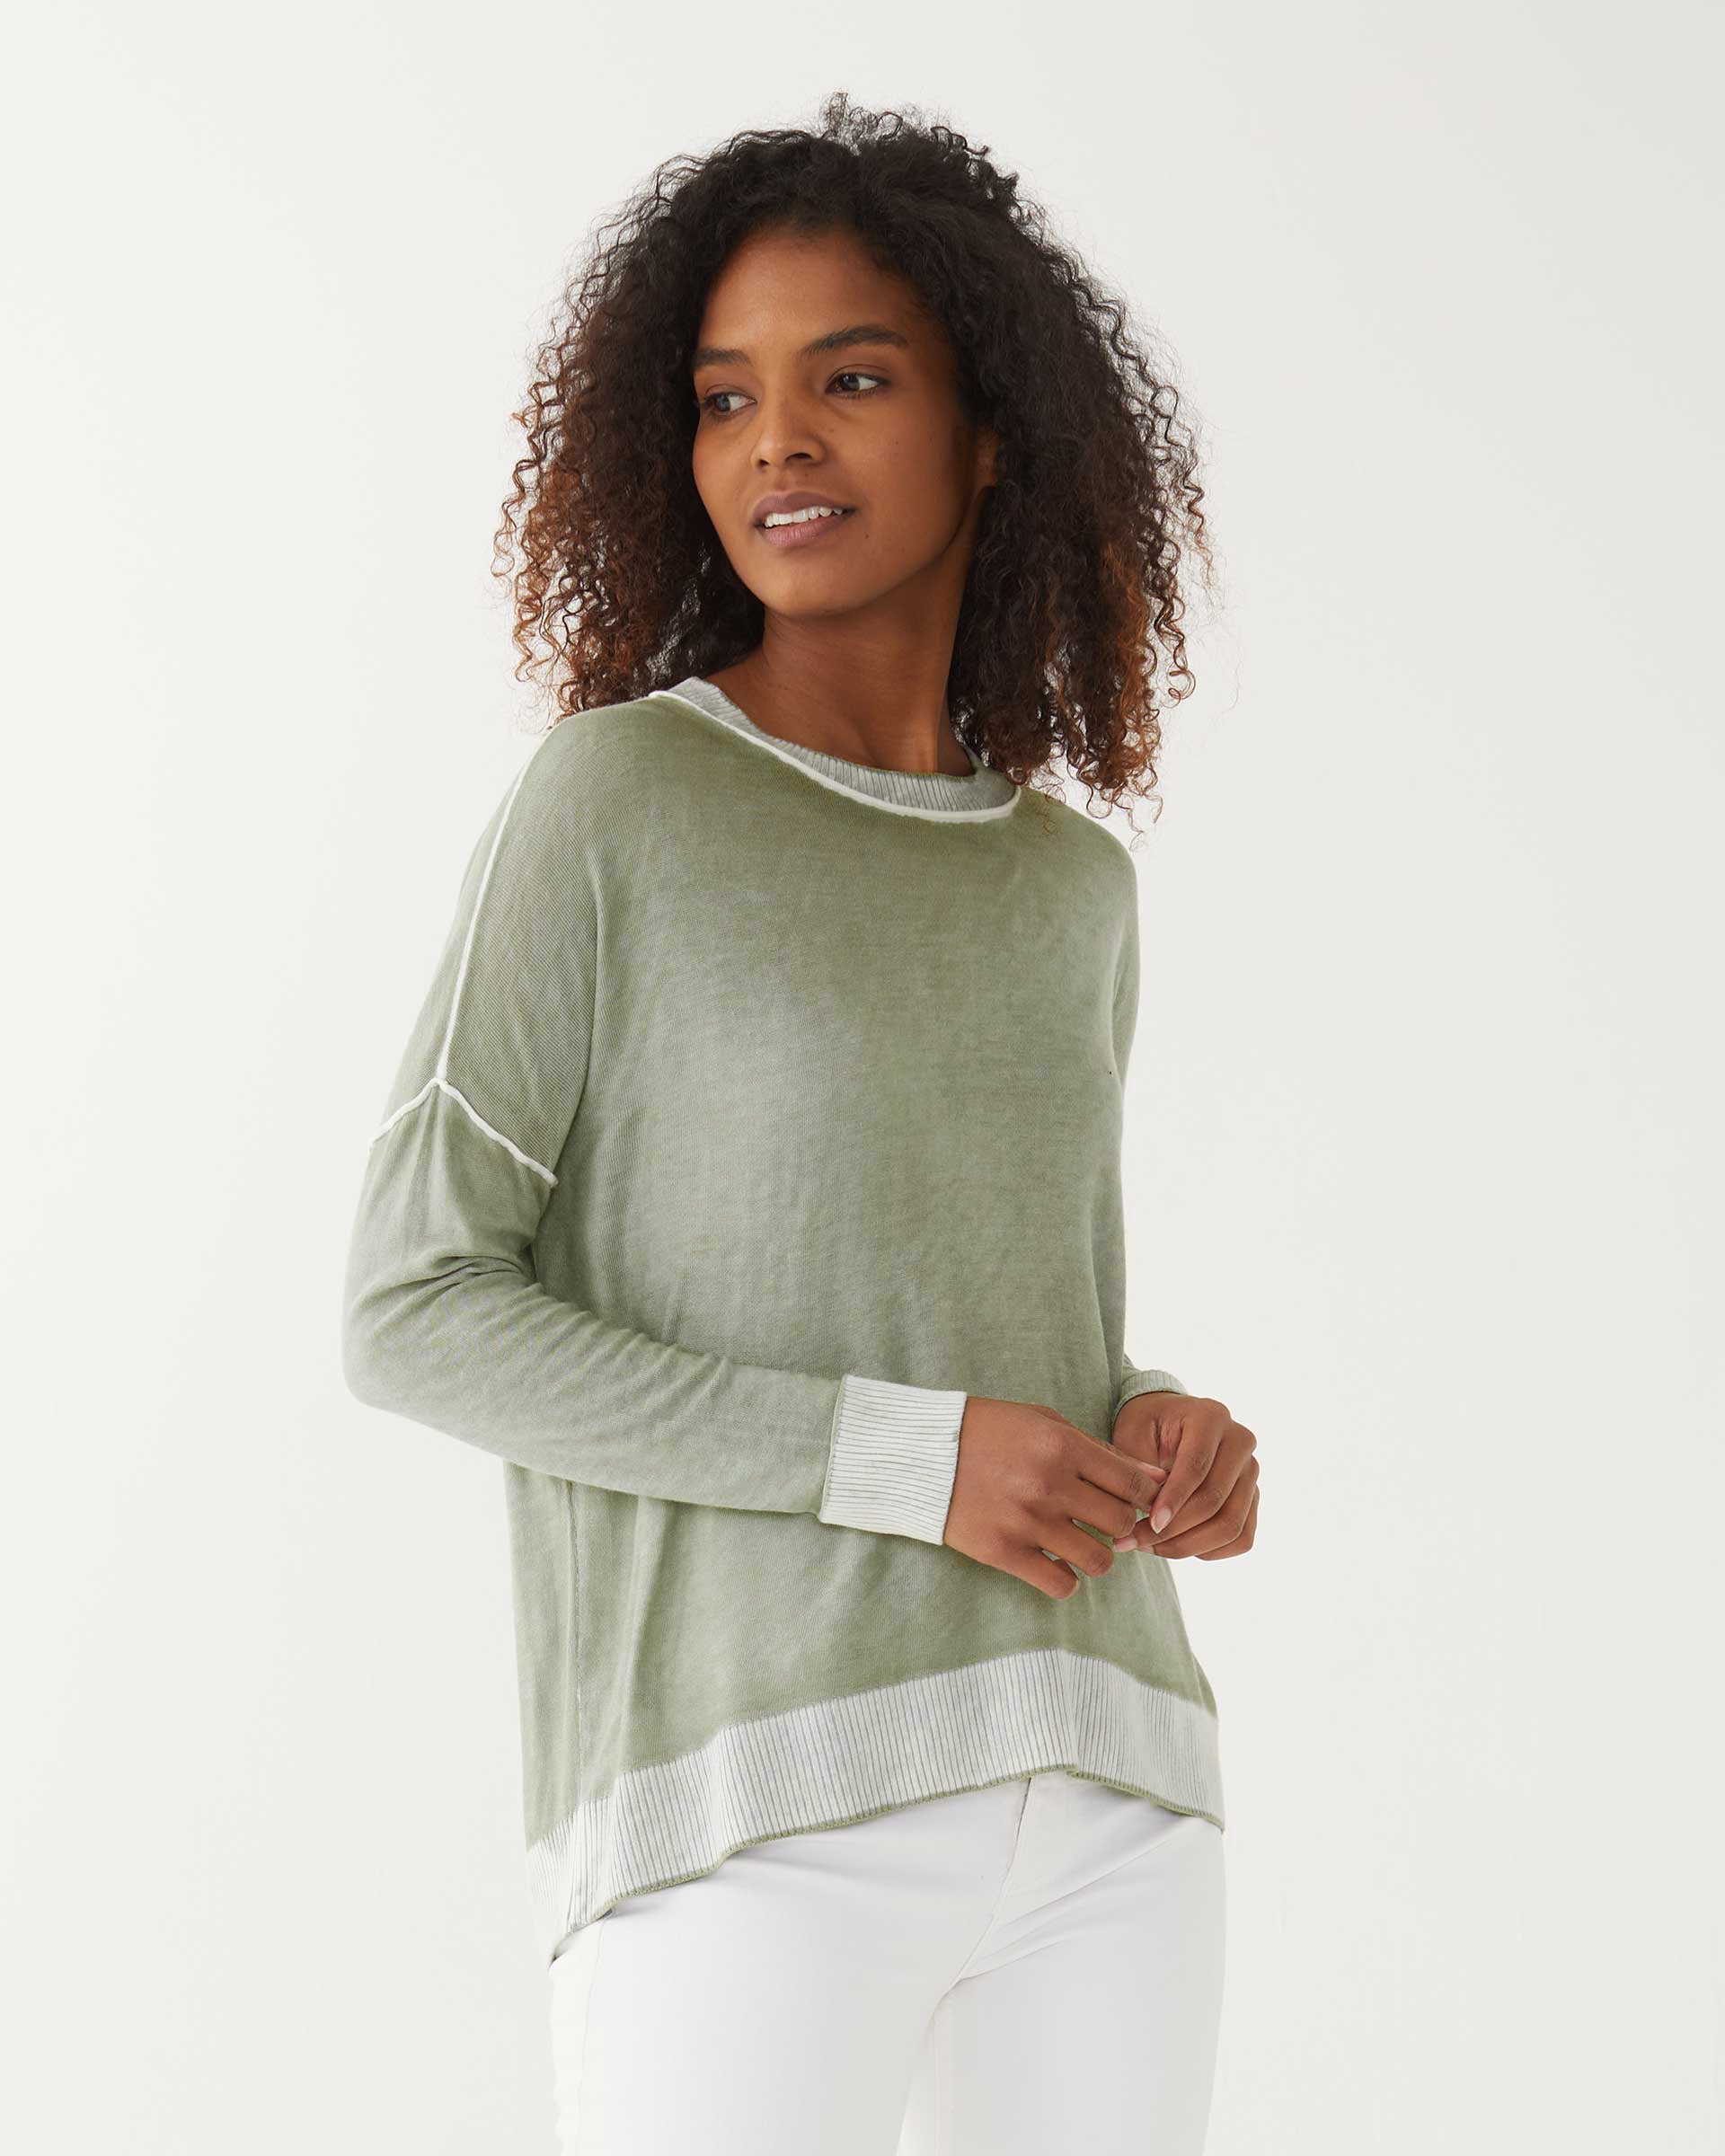 female wearing sea moss green hand-dyed cashmere sweater standing on a white background